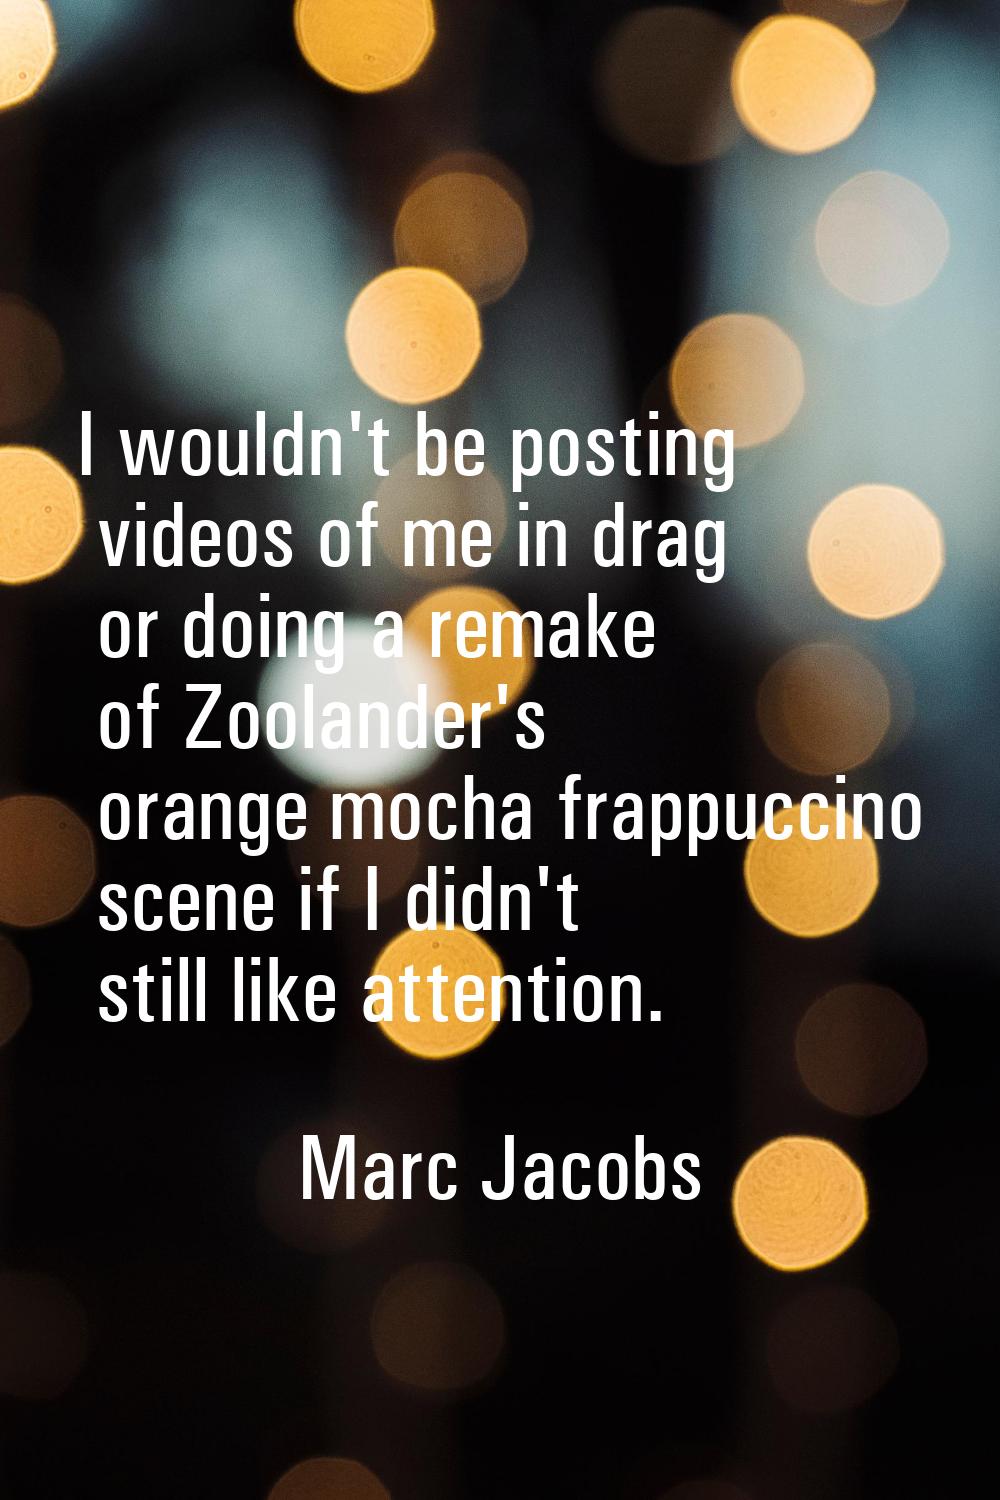 I wouldn't be posting videos of me in drag or doing a remake of Zoolander's orange mocha frappuccin